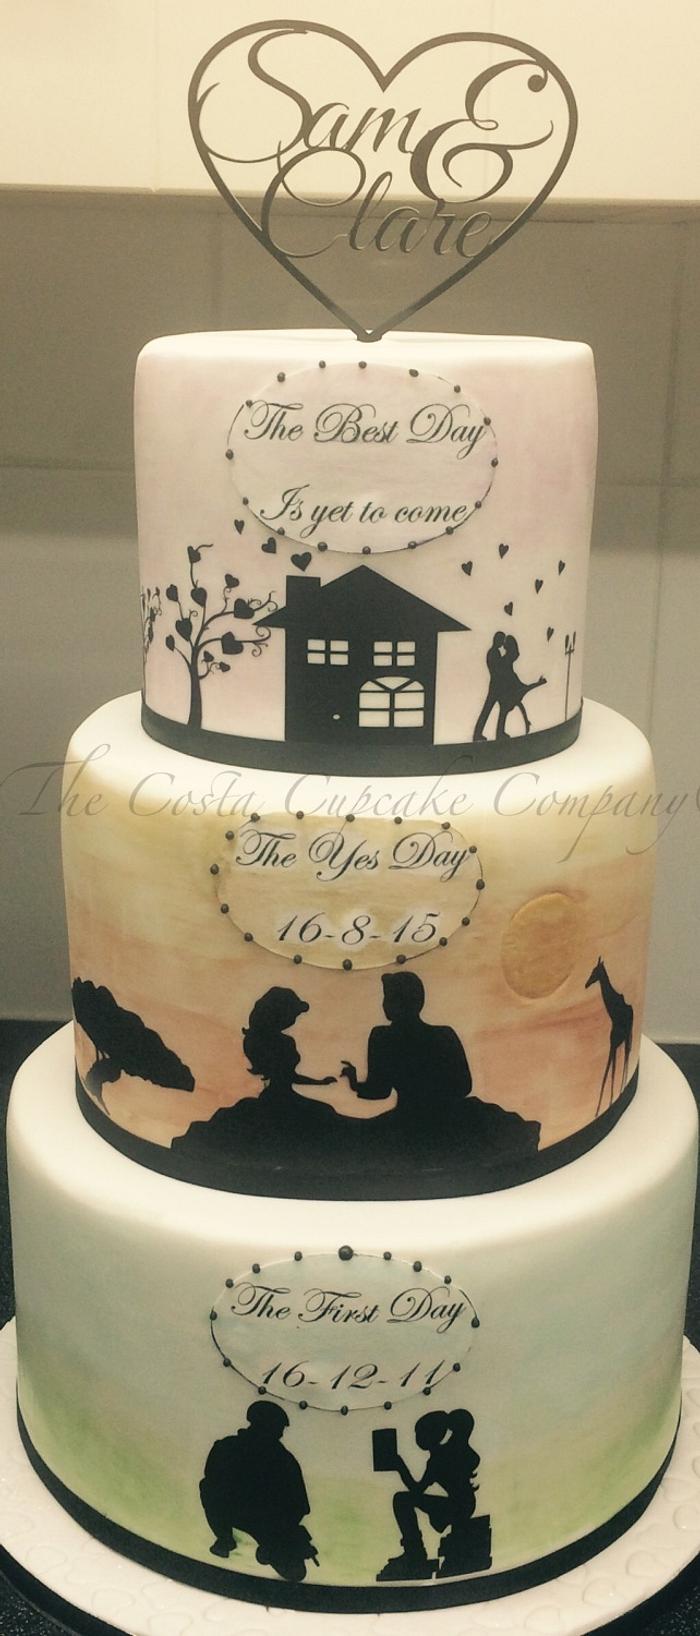 A story in cake - (engagement cake)